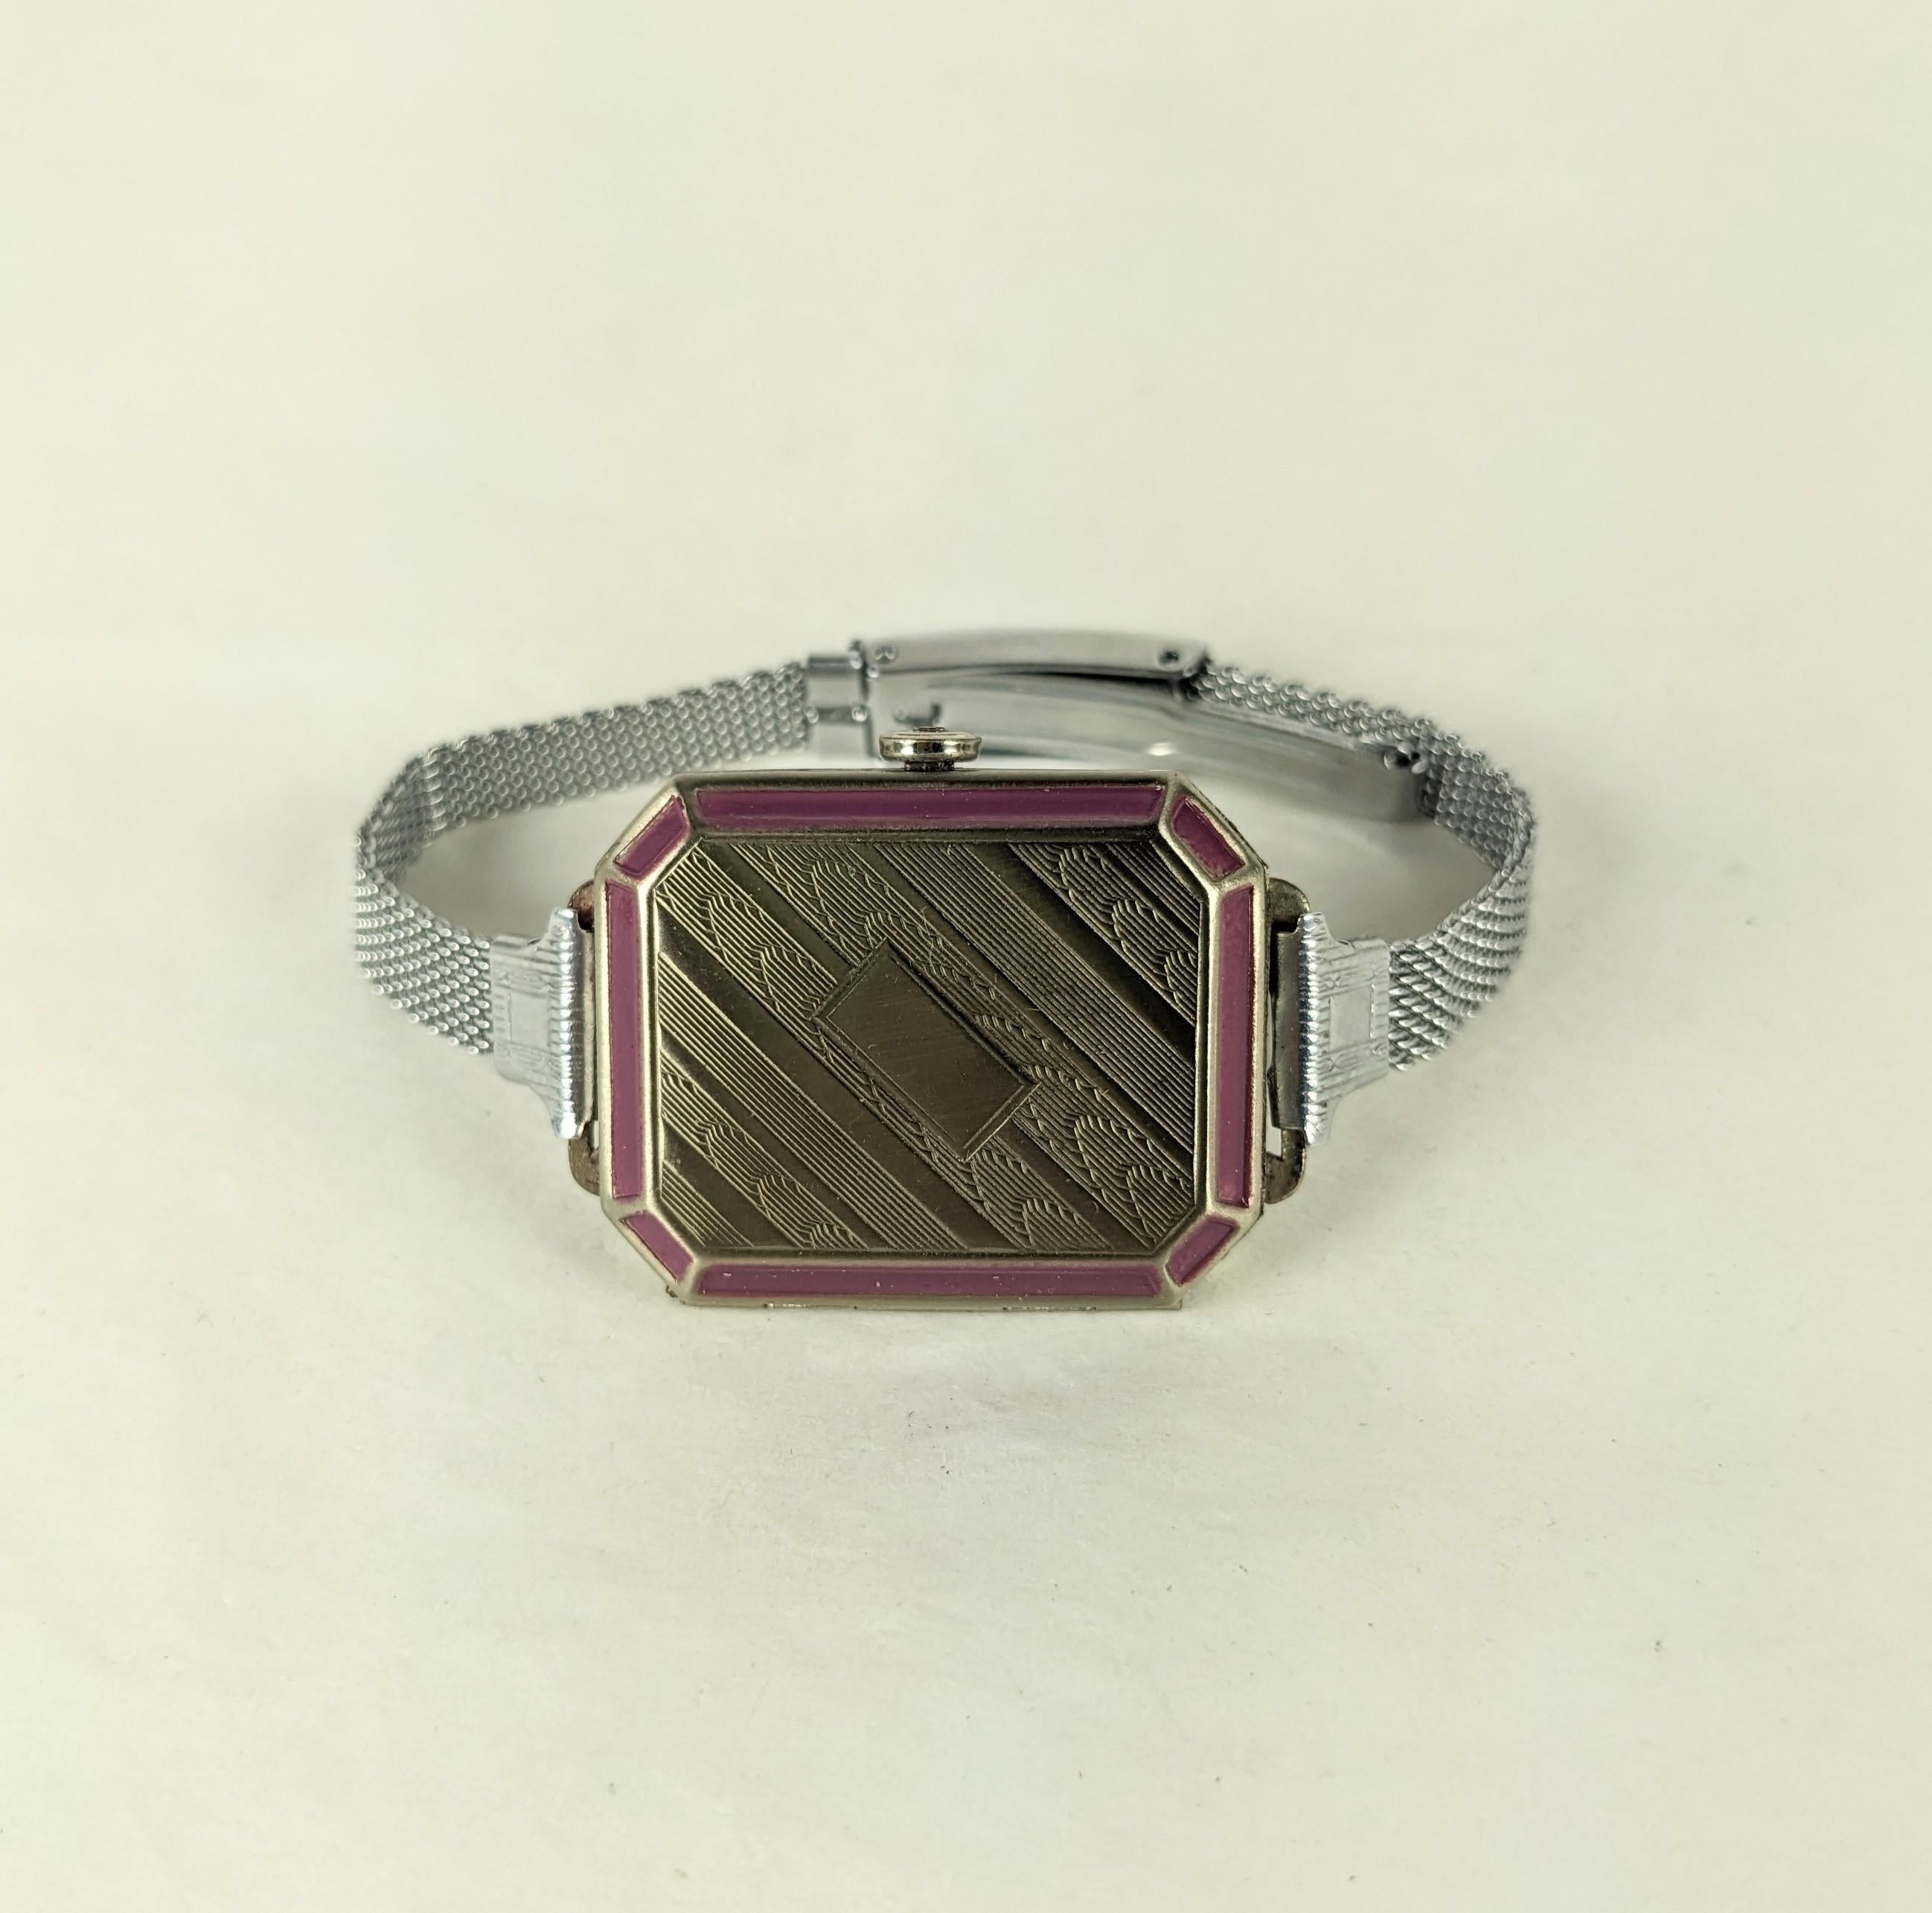 Art Deco Faux Watch Compact from the 1920's. Made to look like a watch in chrome with enamel accents. It opens to reveal both powder and rouge compartments. Marked 